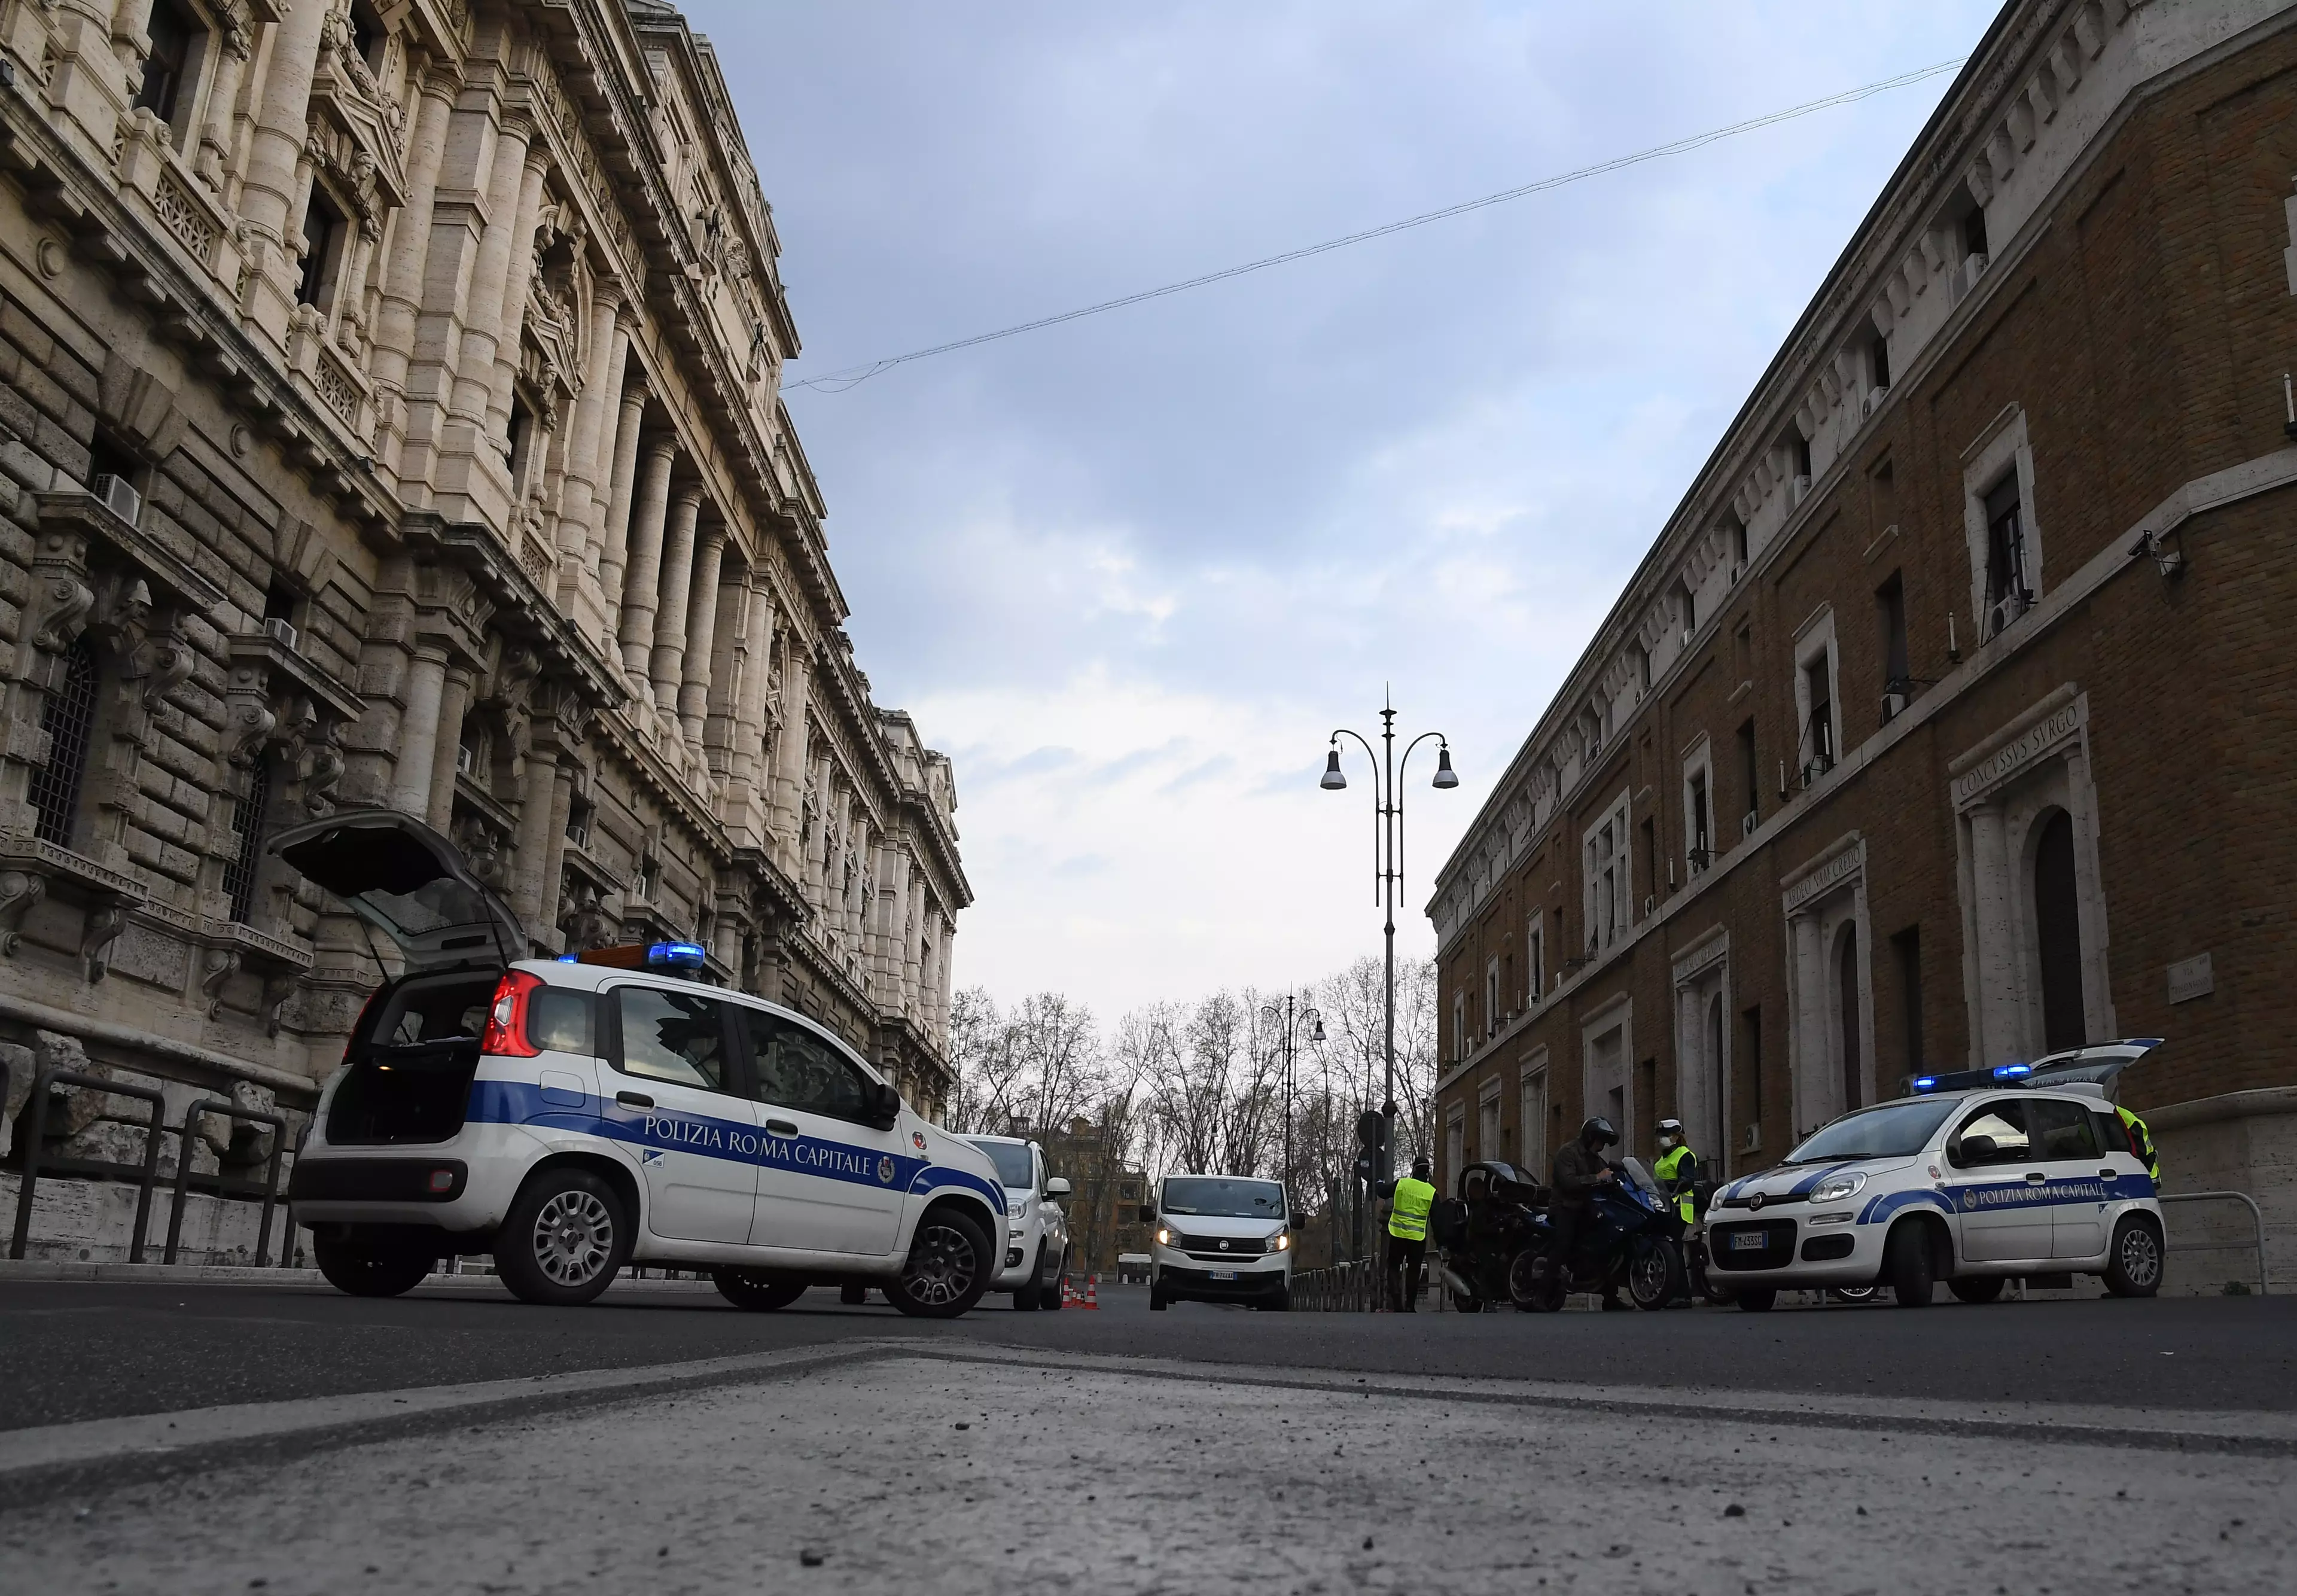 Police are on duty in Italy to make sure residents are abiding with the lockdown.